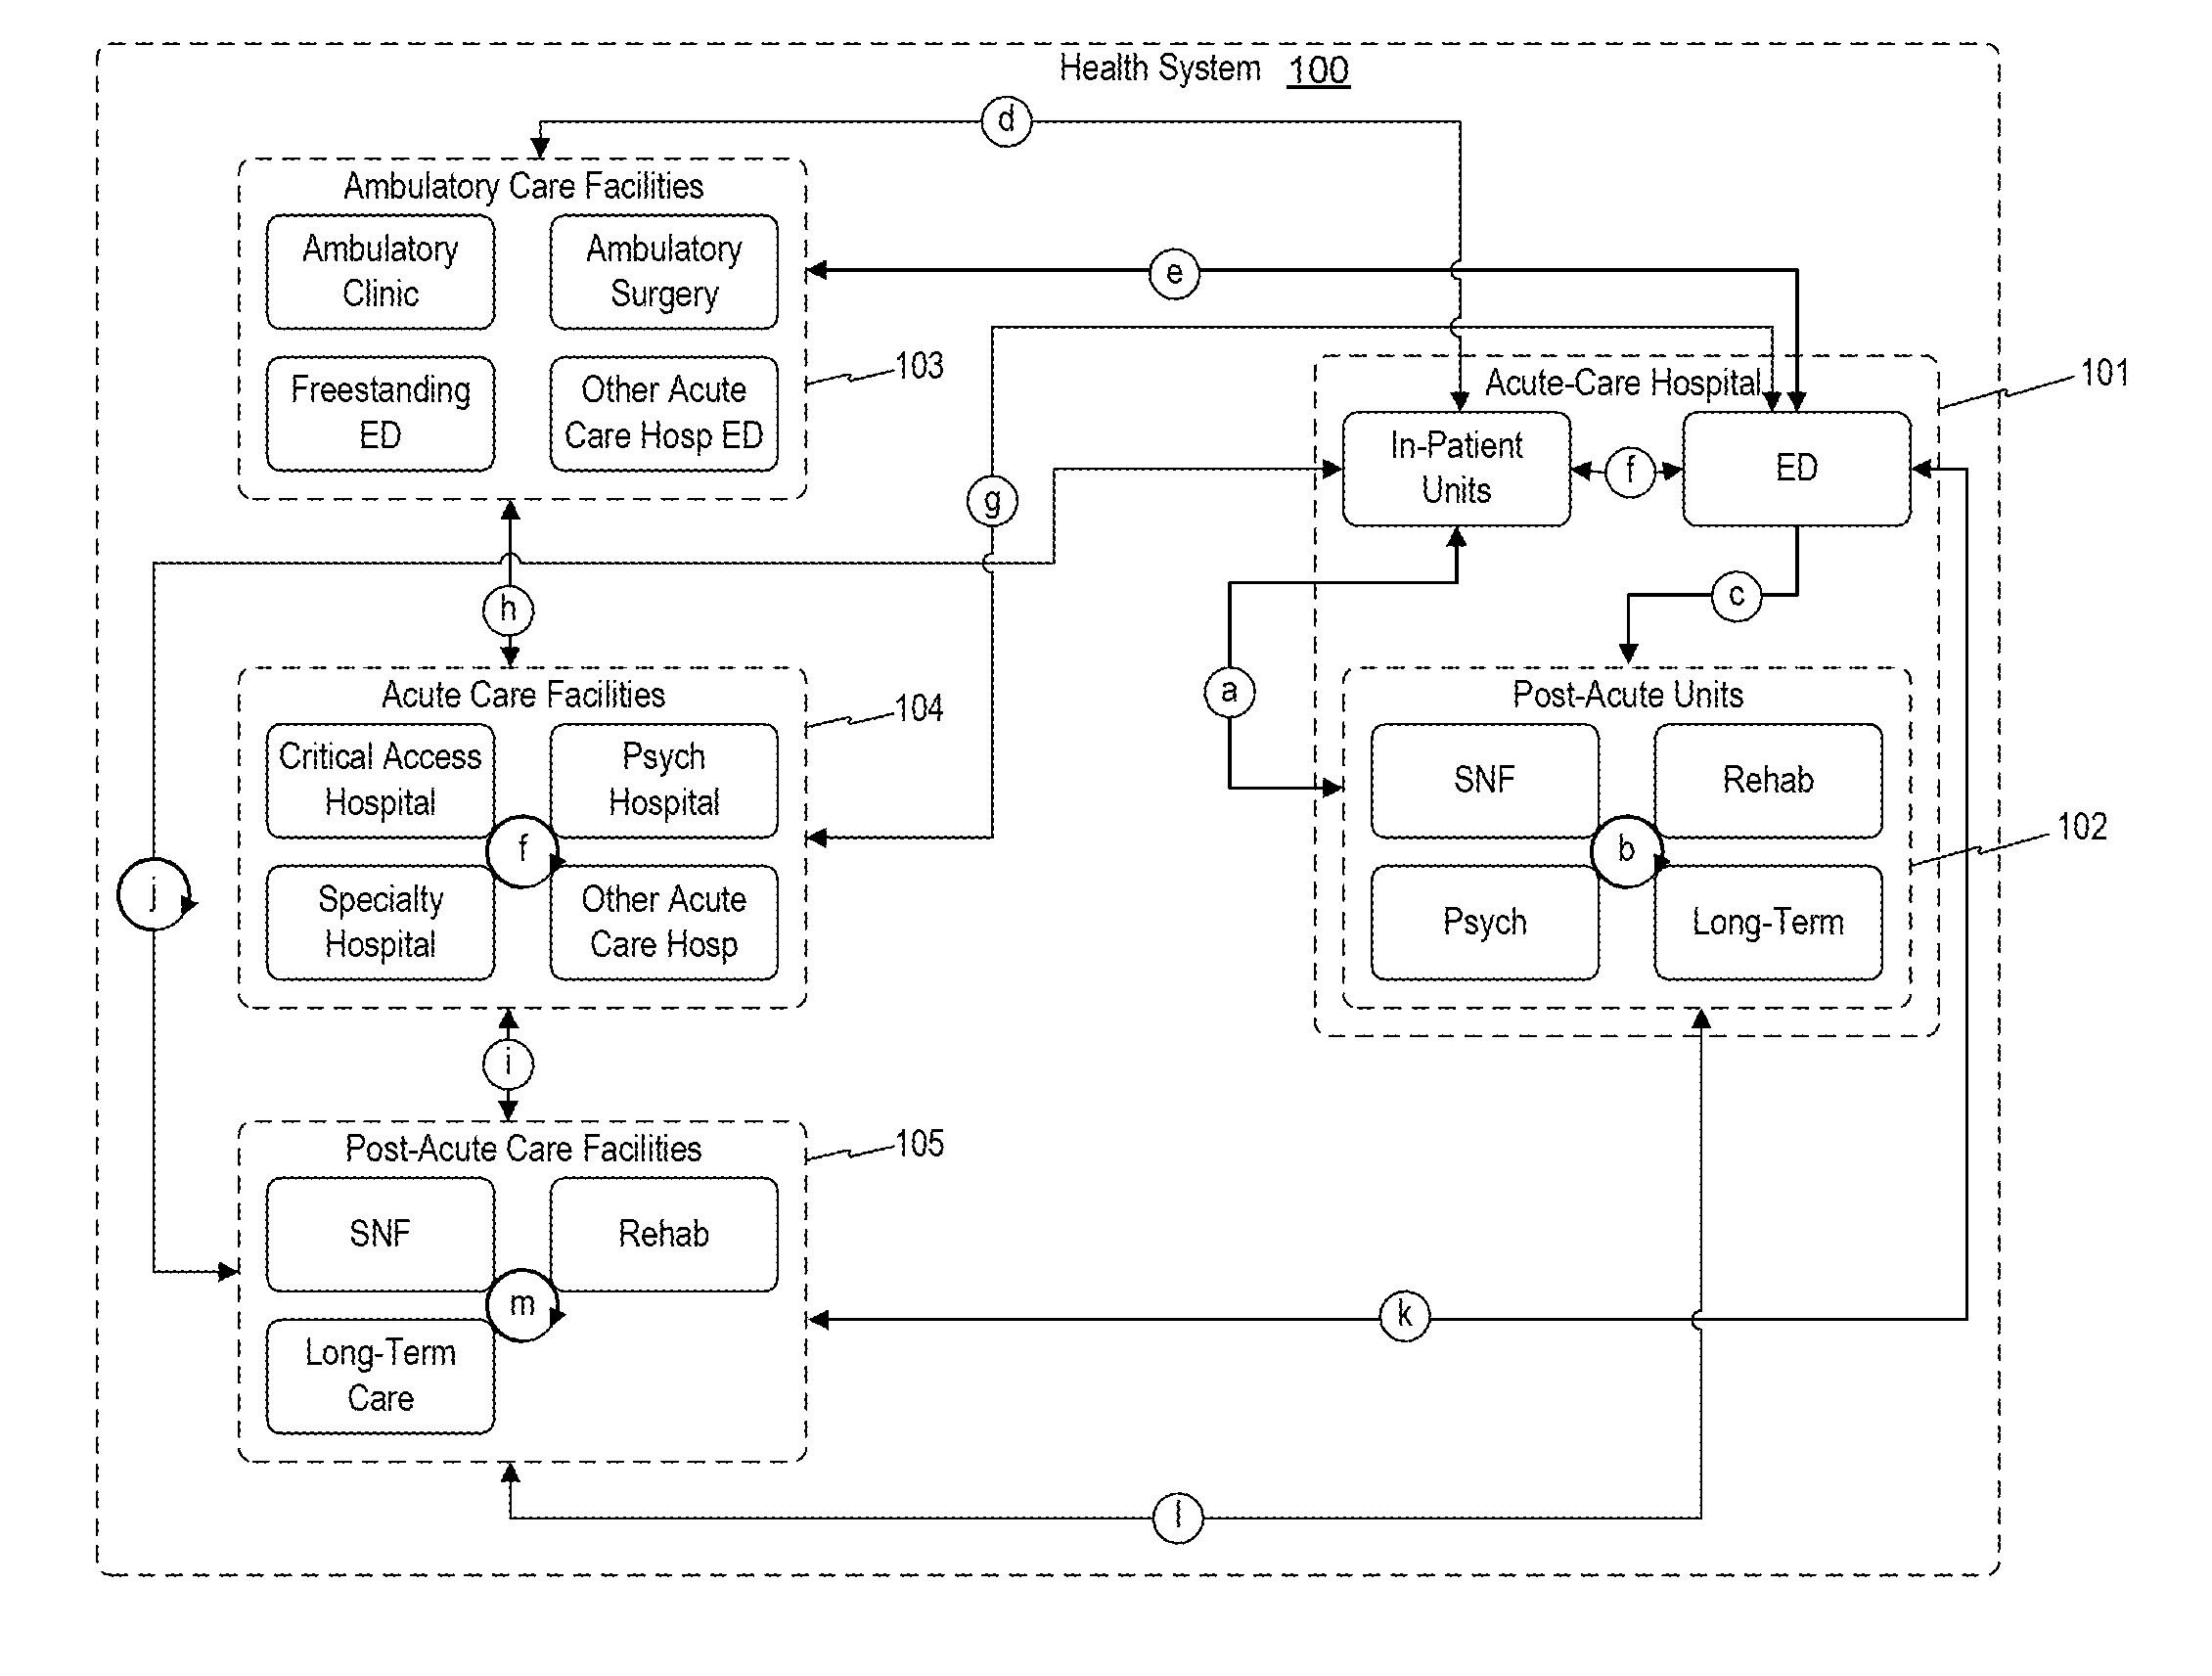 Computerized data processing systems and methods for generating graphical user interfaces